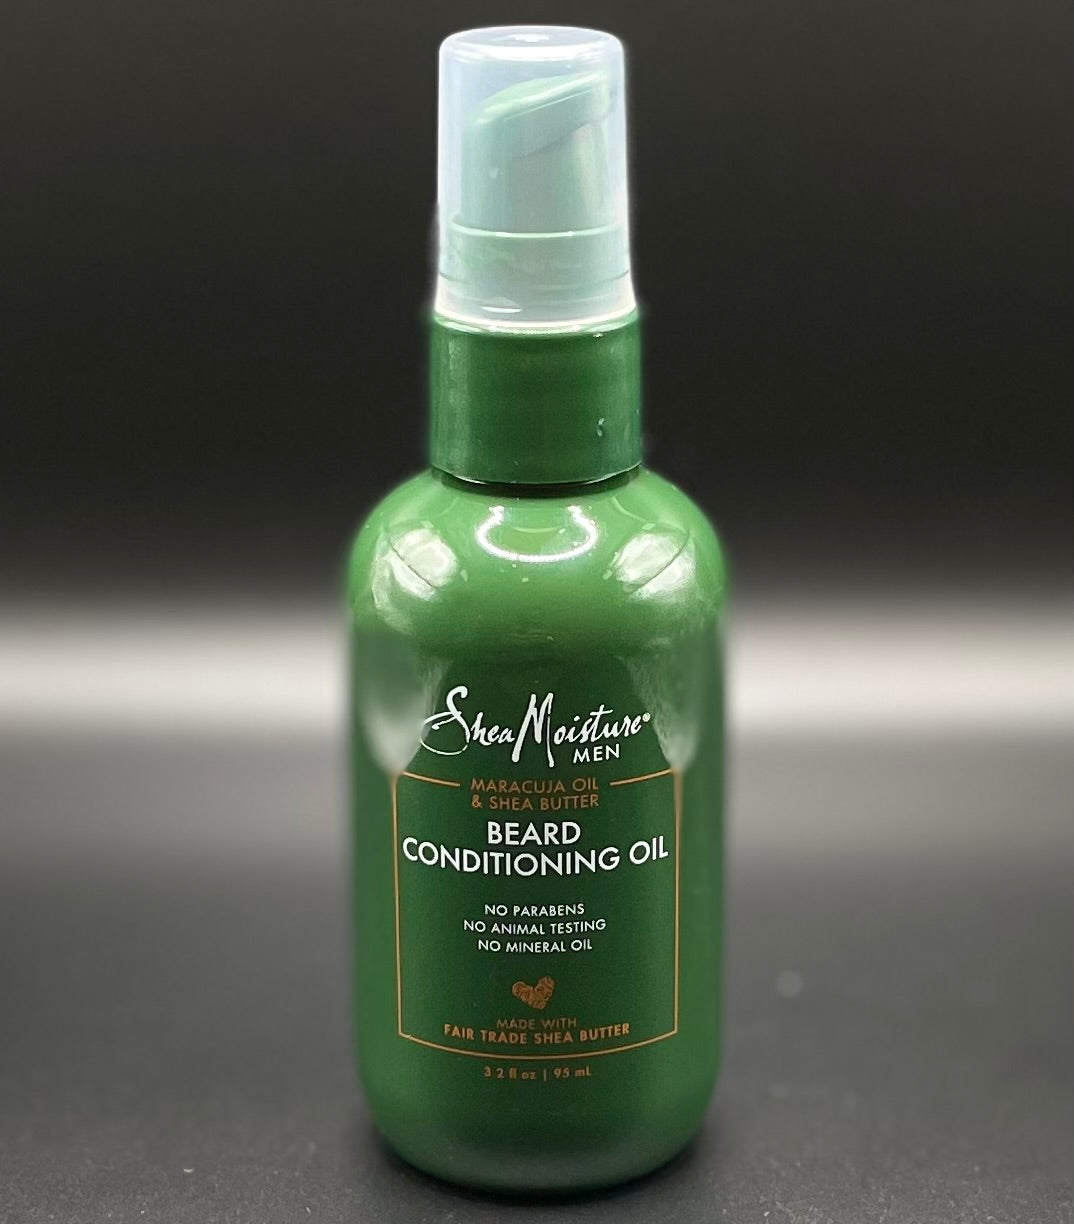 Shea Moisture-Beard Conditioning Oil for a Full Beard Maracuja Oil and Shea Butter to Moisturize and Soften Beards